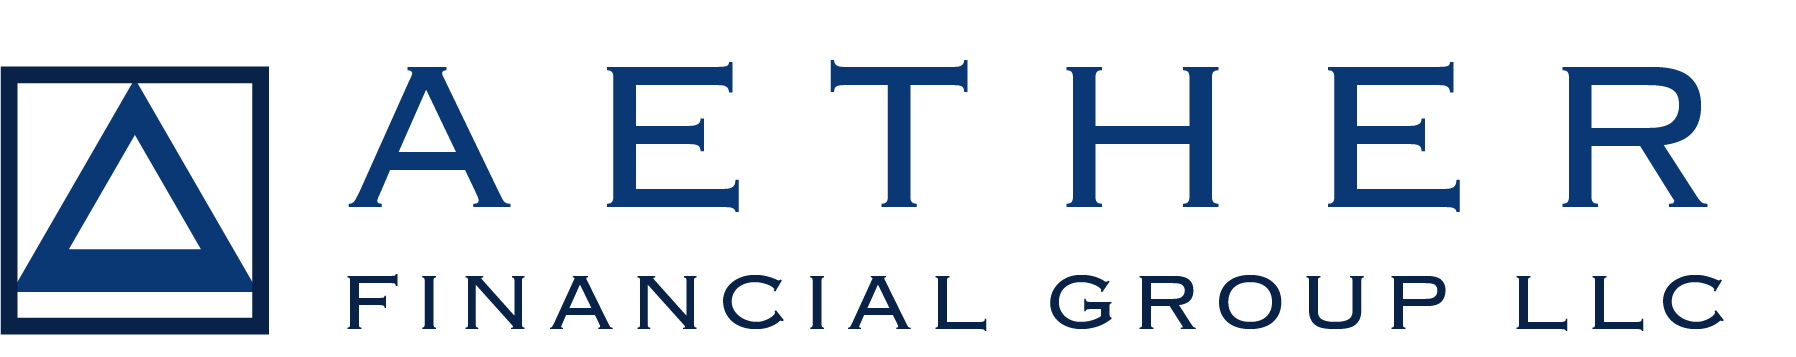 Photo of Aether Financial Group